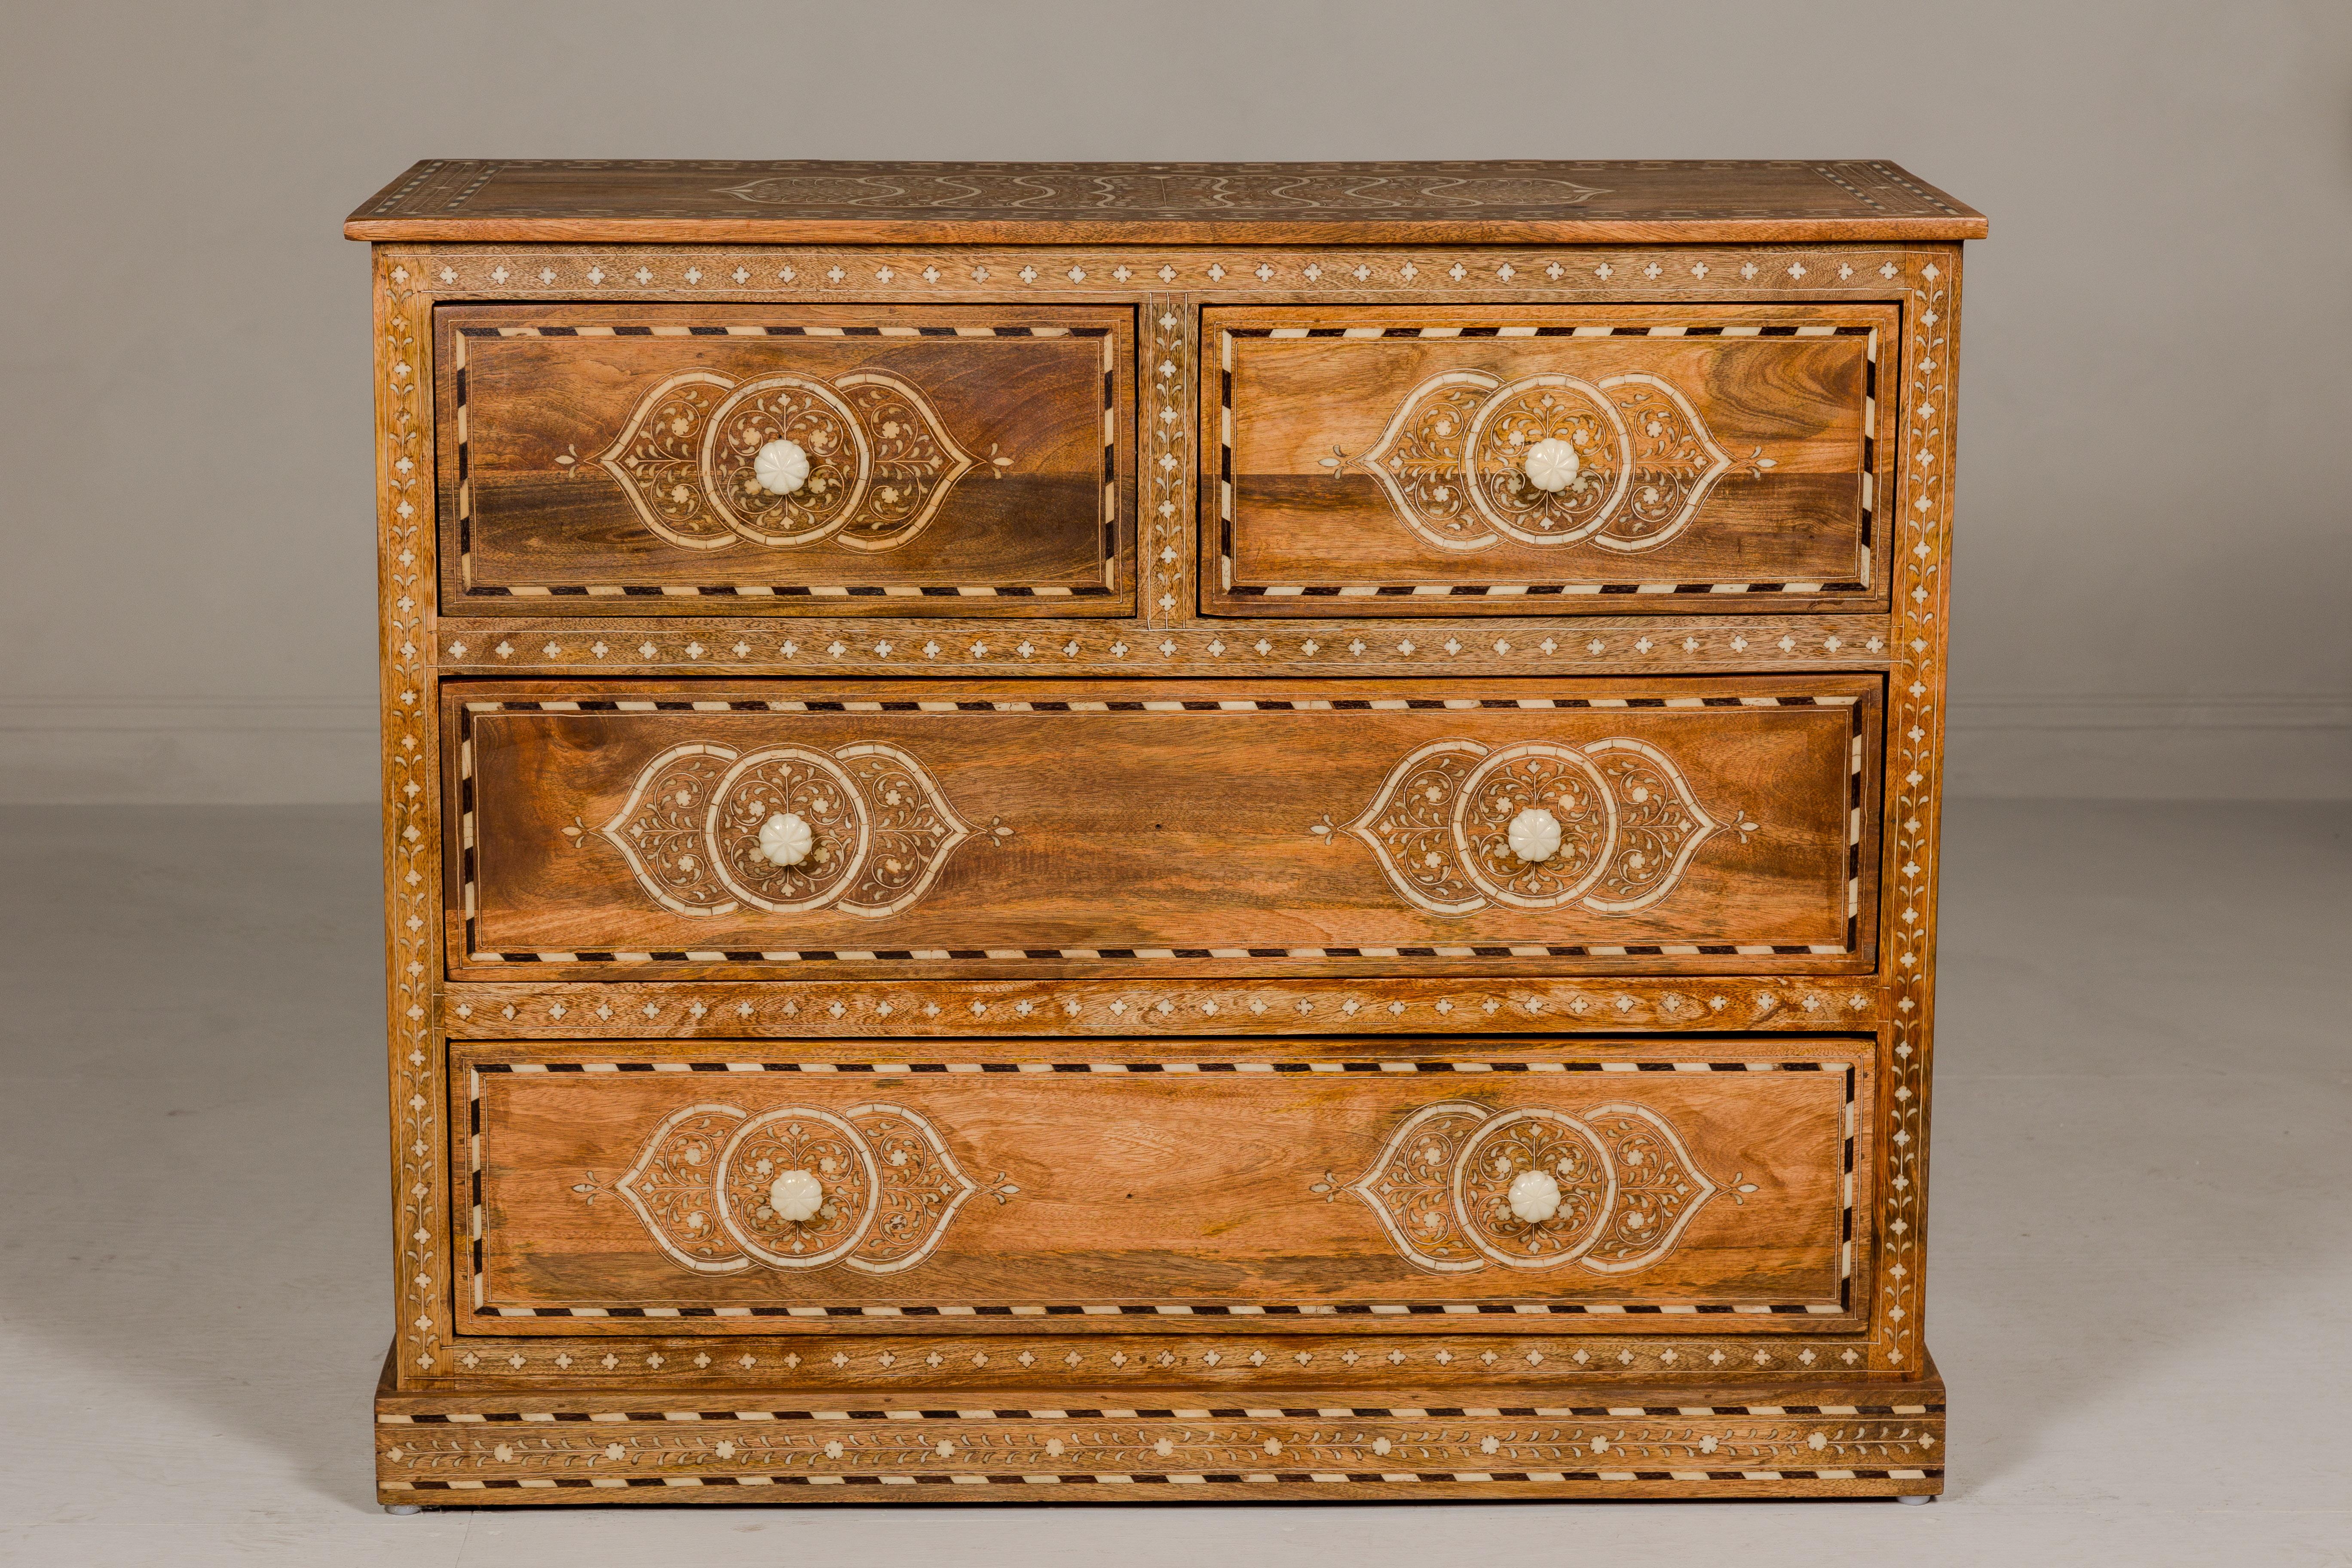 An Anglo Indian style mango wood chest with four drawers, floral themed bone inlay and bone hardware. Discover the elegance and craftsmanship of this Anglo-Indian style mango wood chest, a true masterpiece adorned with intricate floral-themed bone